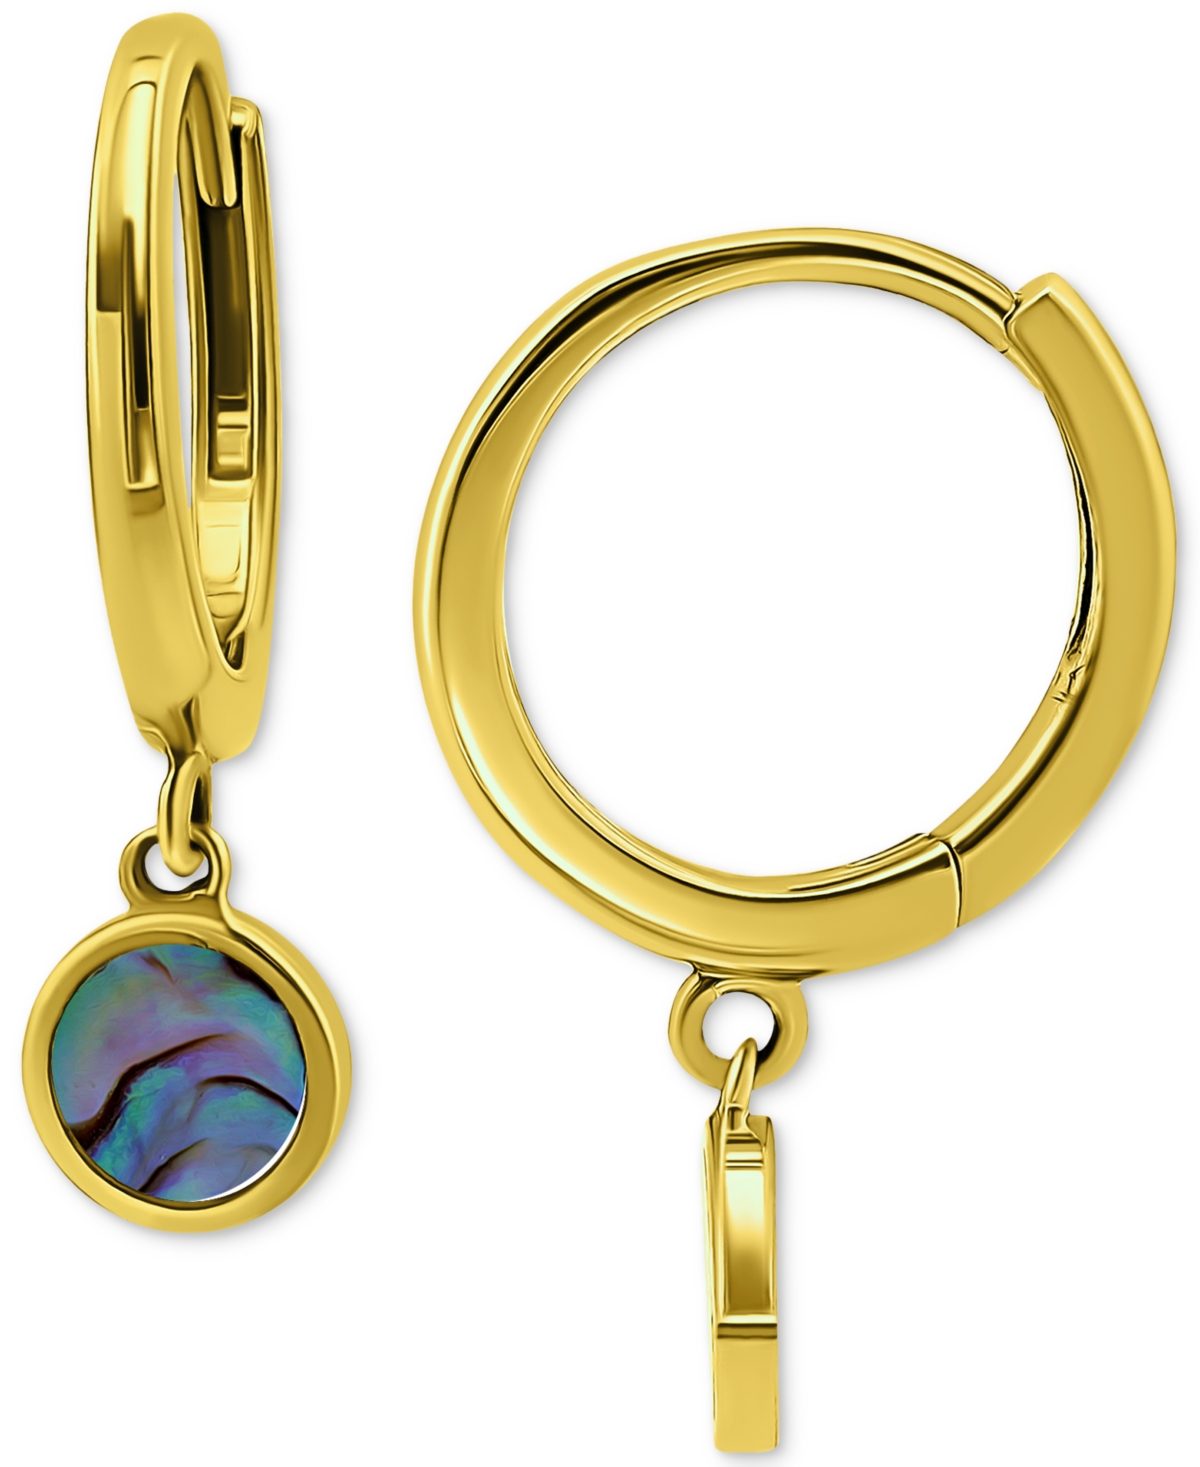 Abalone Disc Dangle Hoop Drop Earrings in 18k Gold-Plated Sterling Silver, Created for Macy's - Abalone